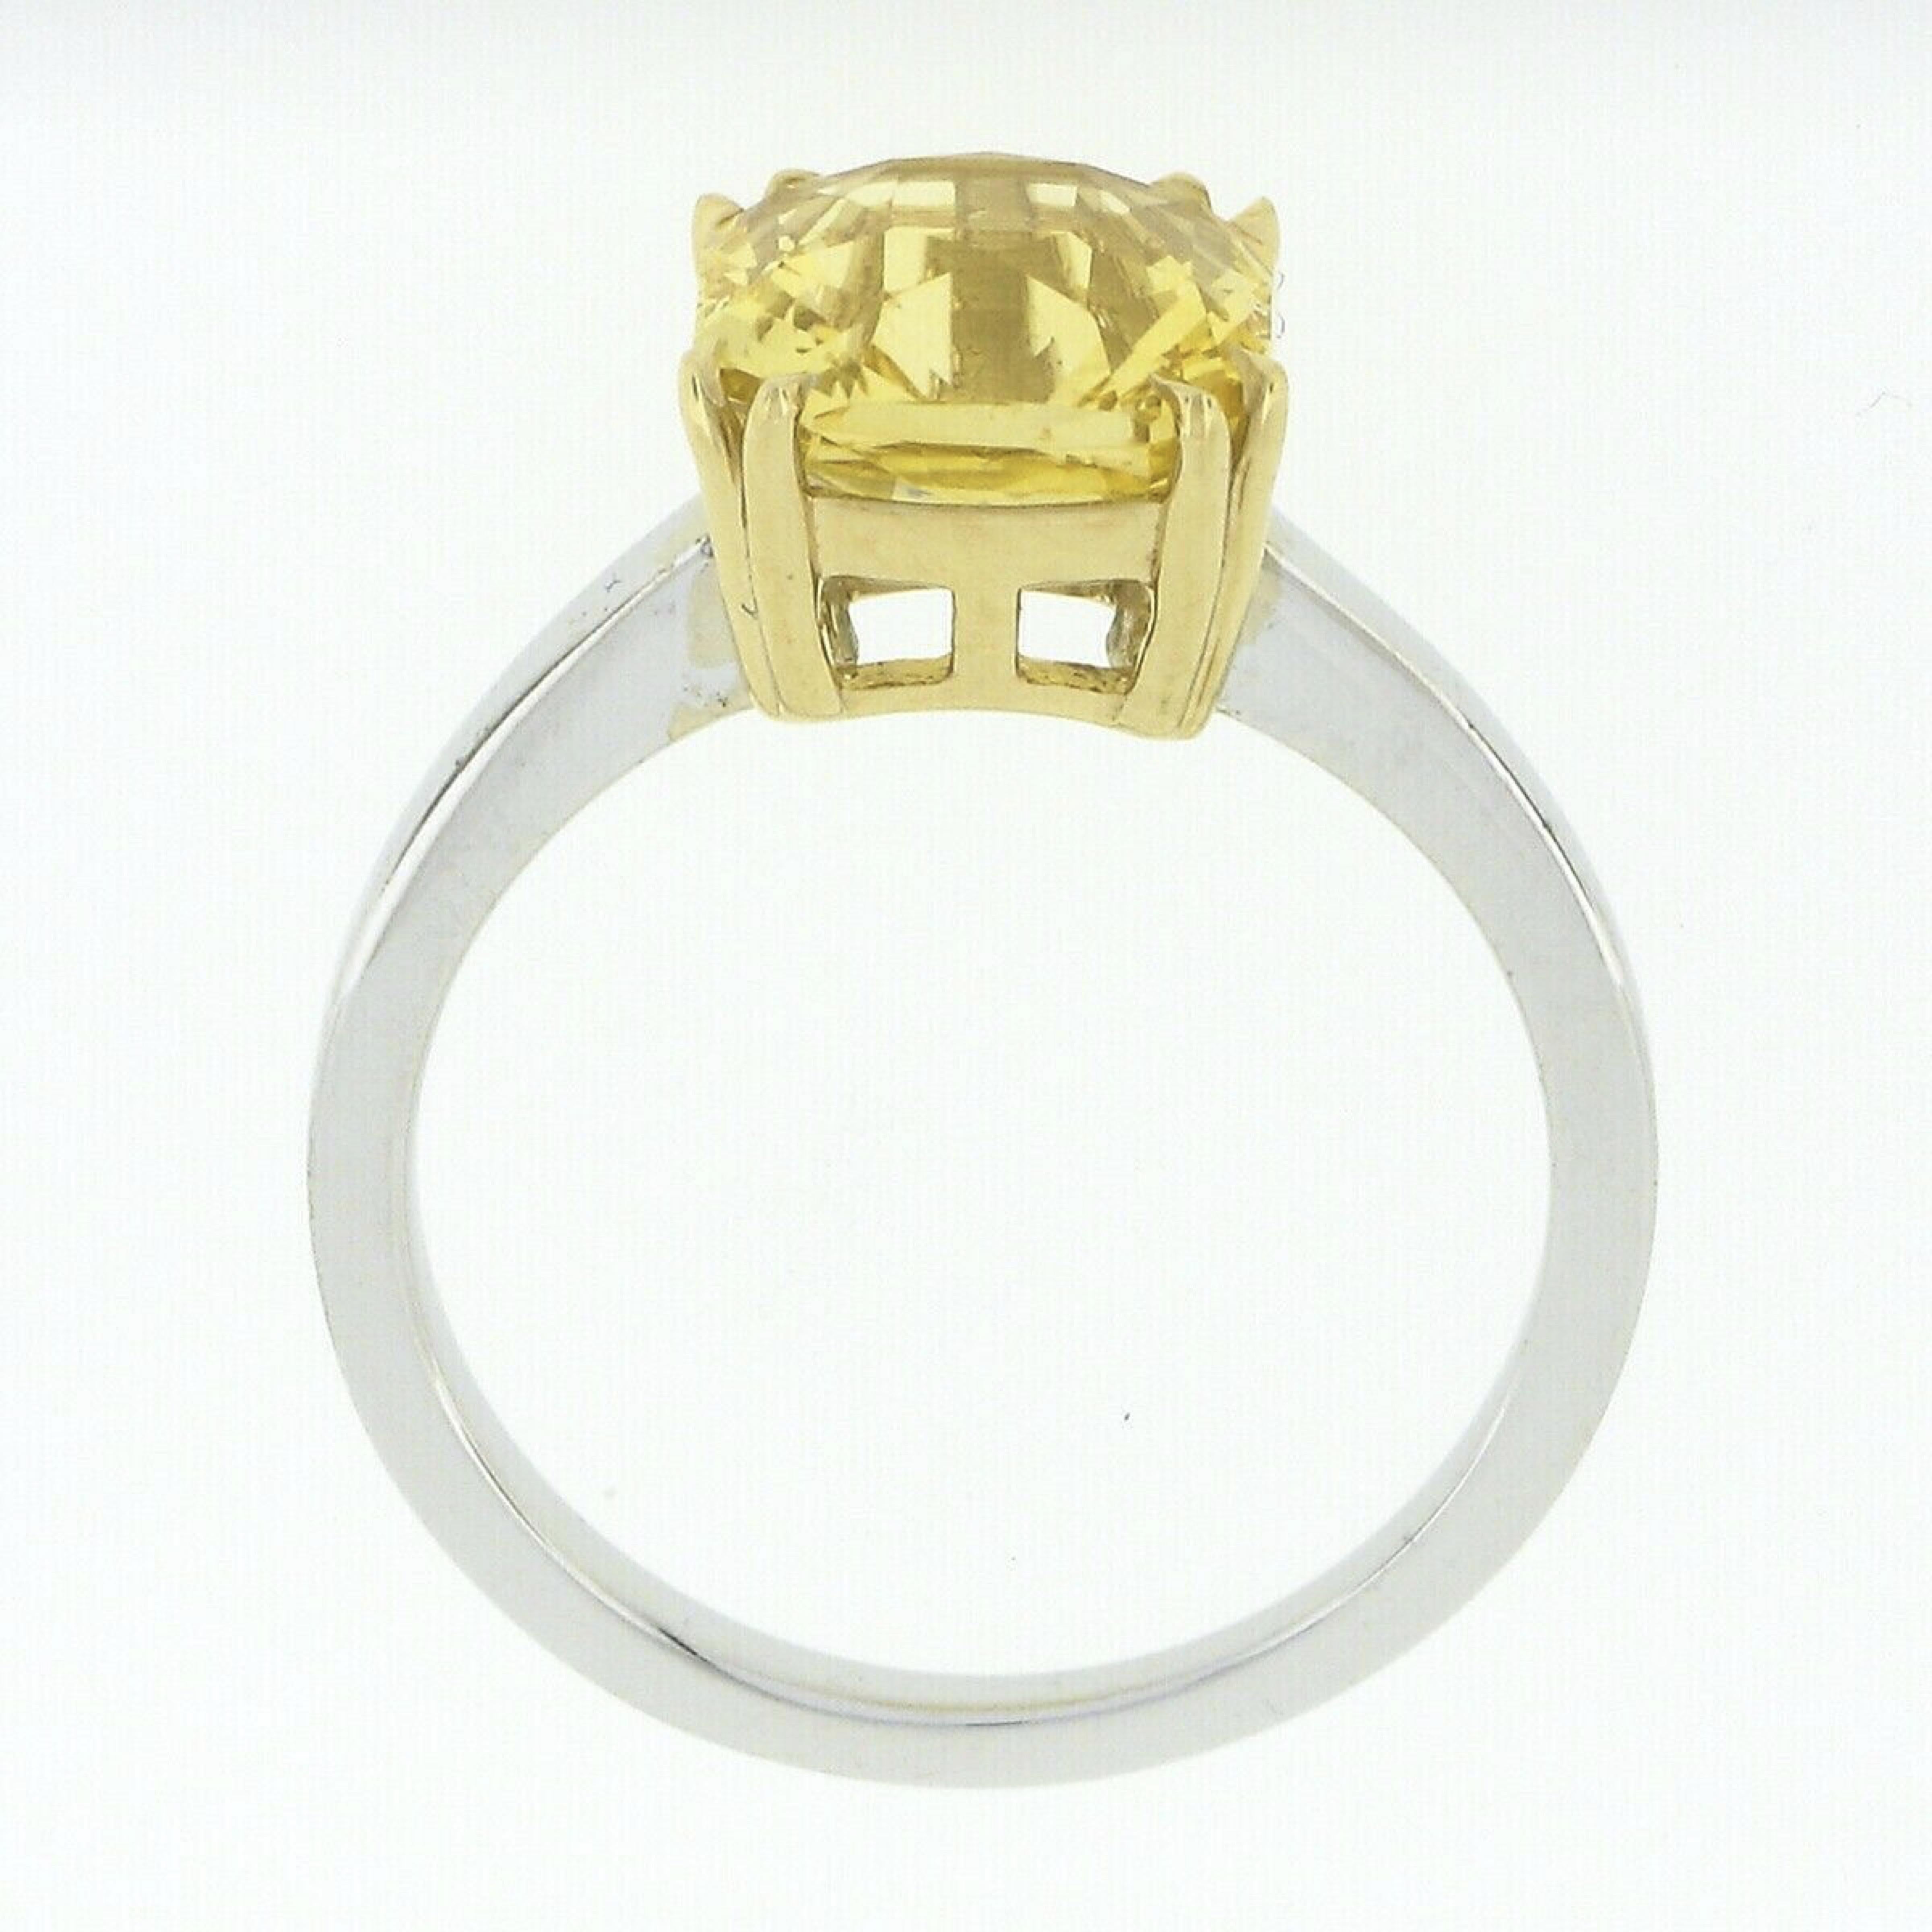 New 18k Solid Gold GIA Ceylon No Heat Vivid Yellow Sapphire Solitaire Ring 3